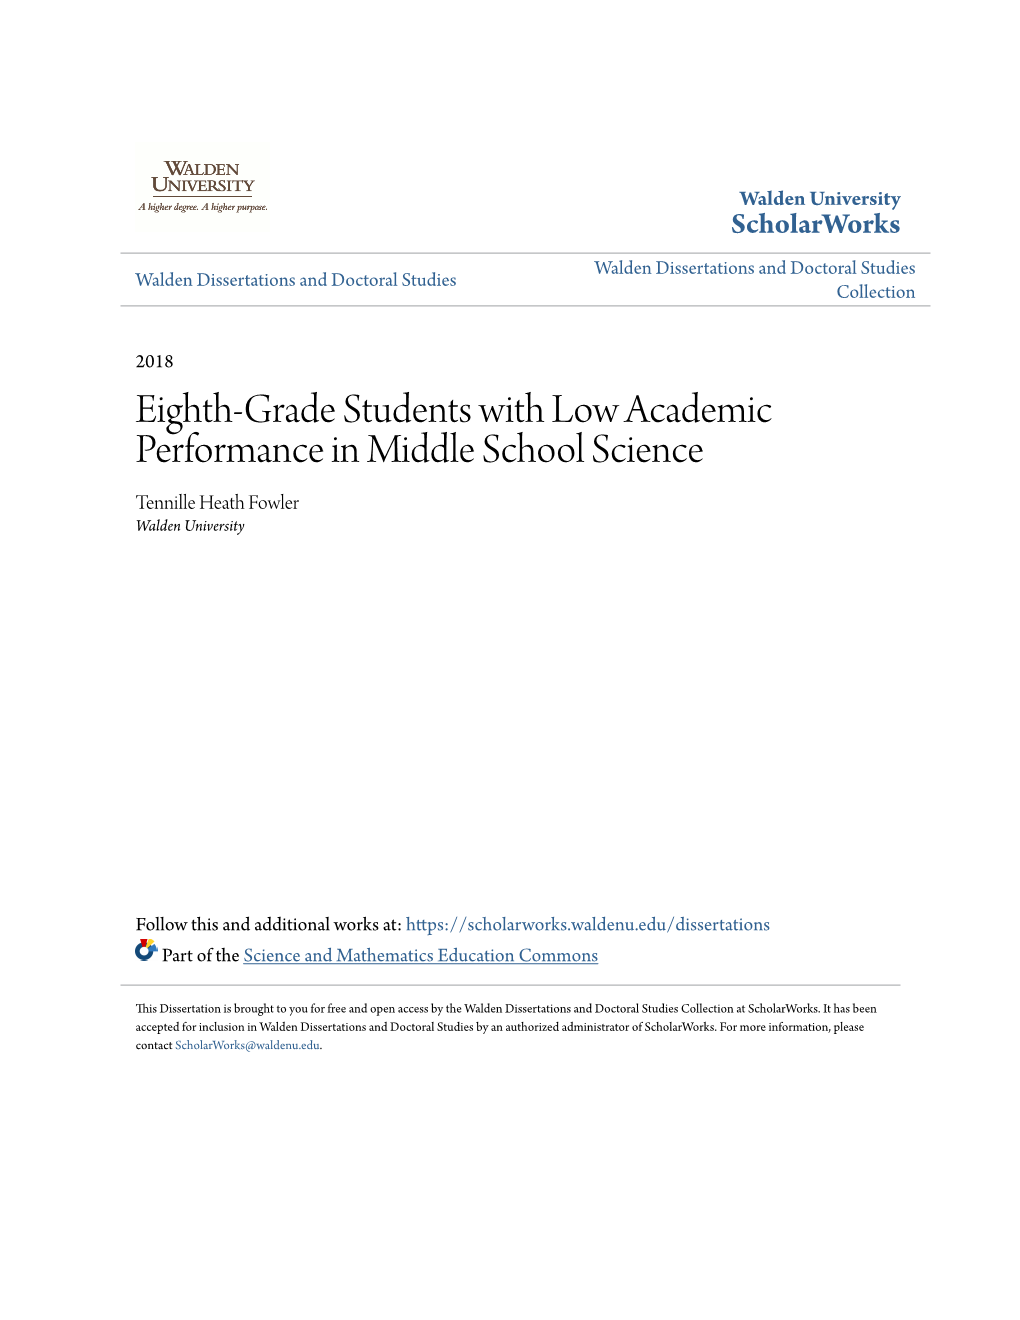 Eighth-Grade Students with Low Academic Performance in Middle School Science Tennille Heath Fowler Walden University